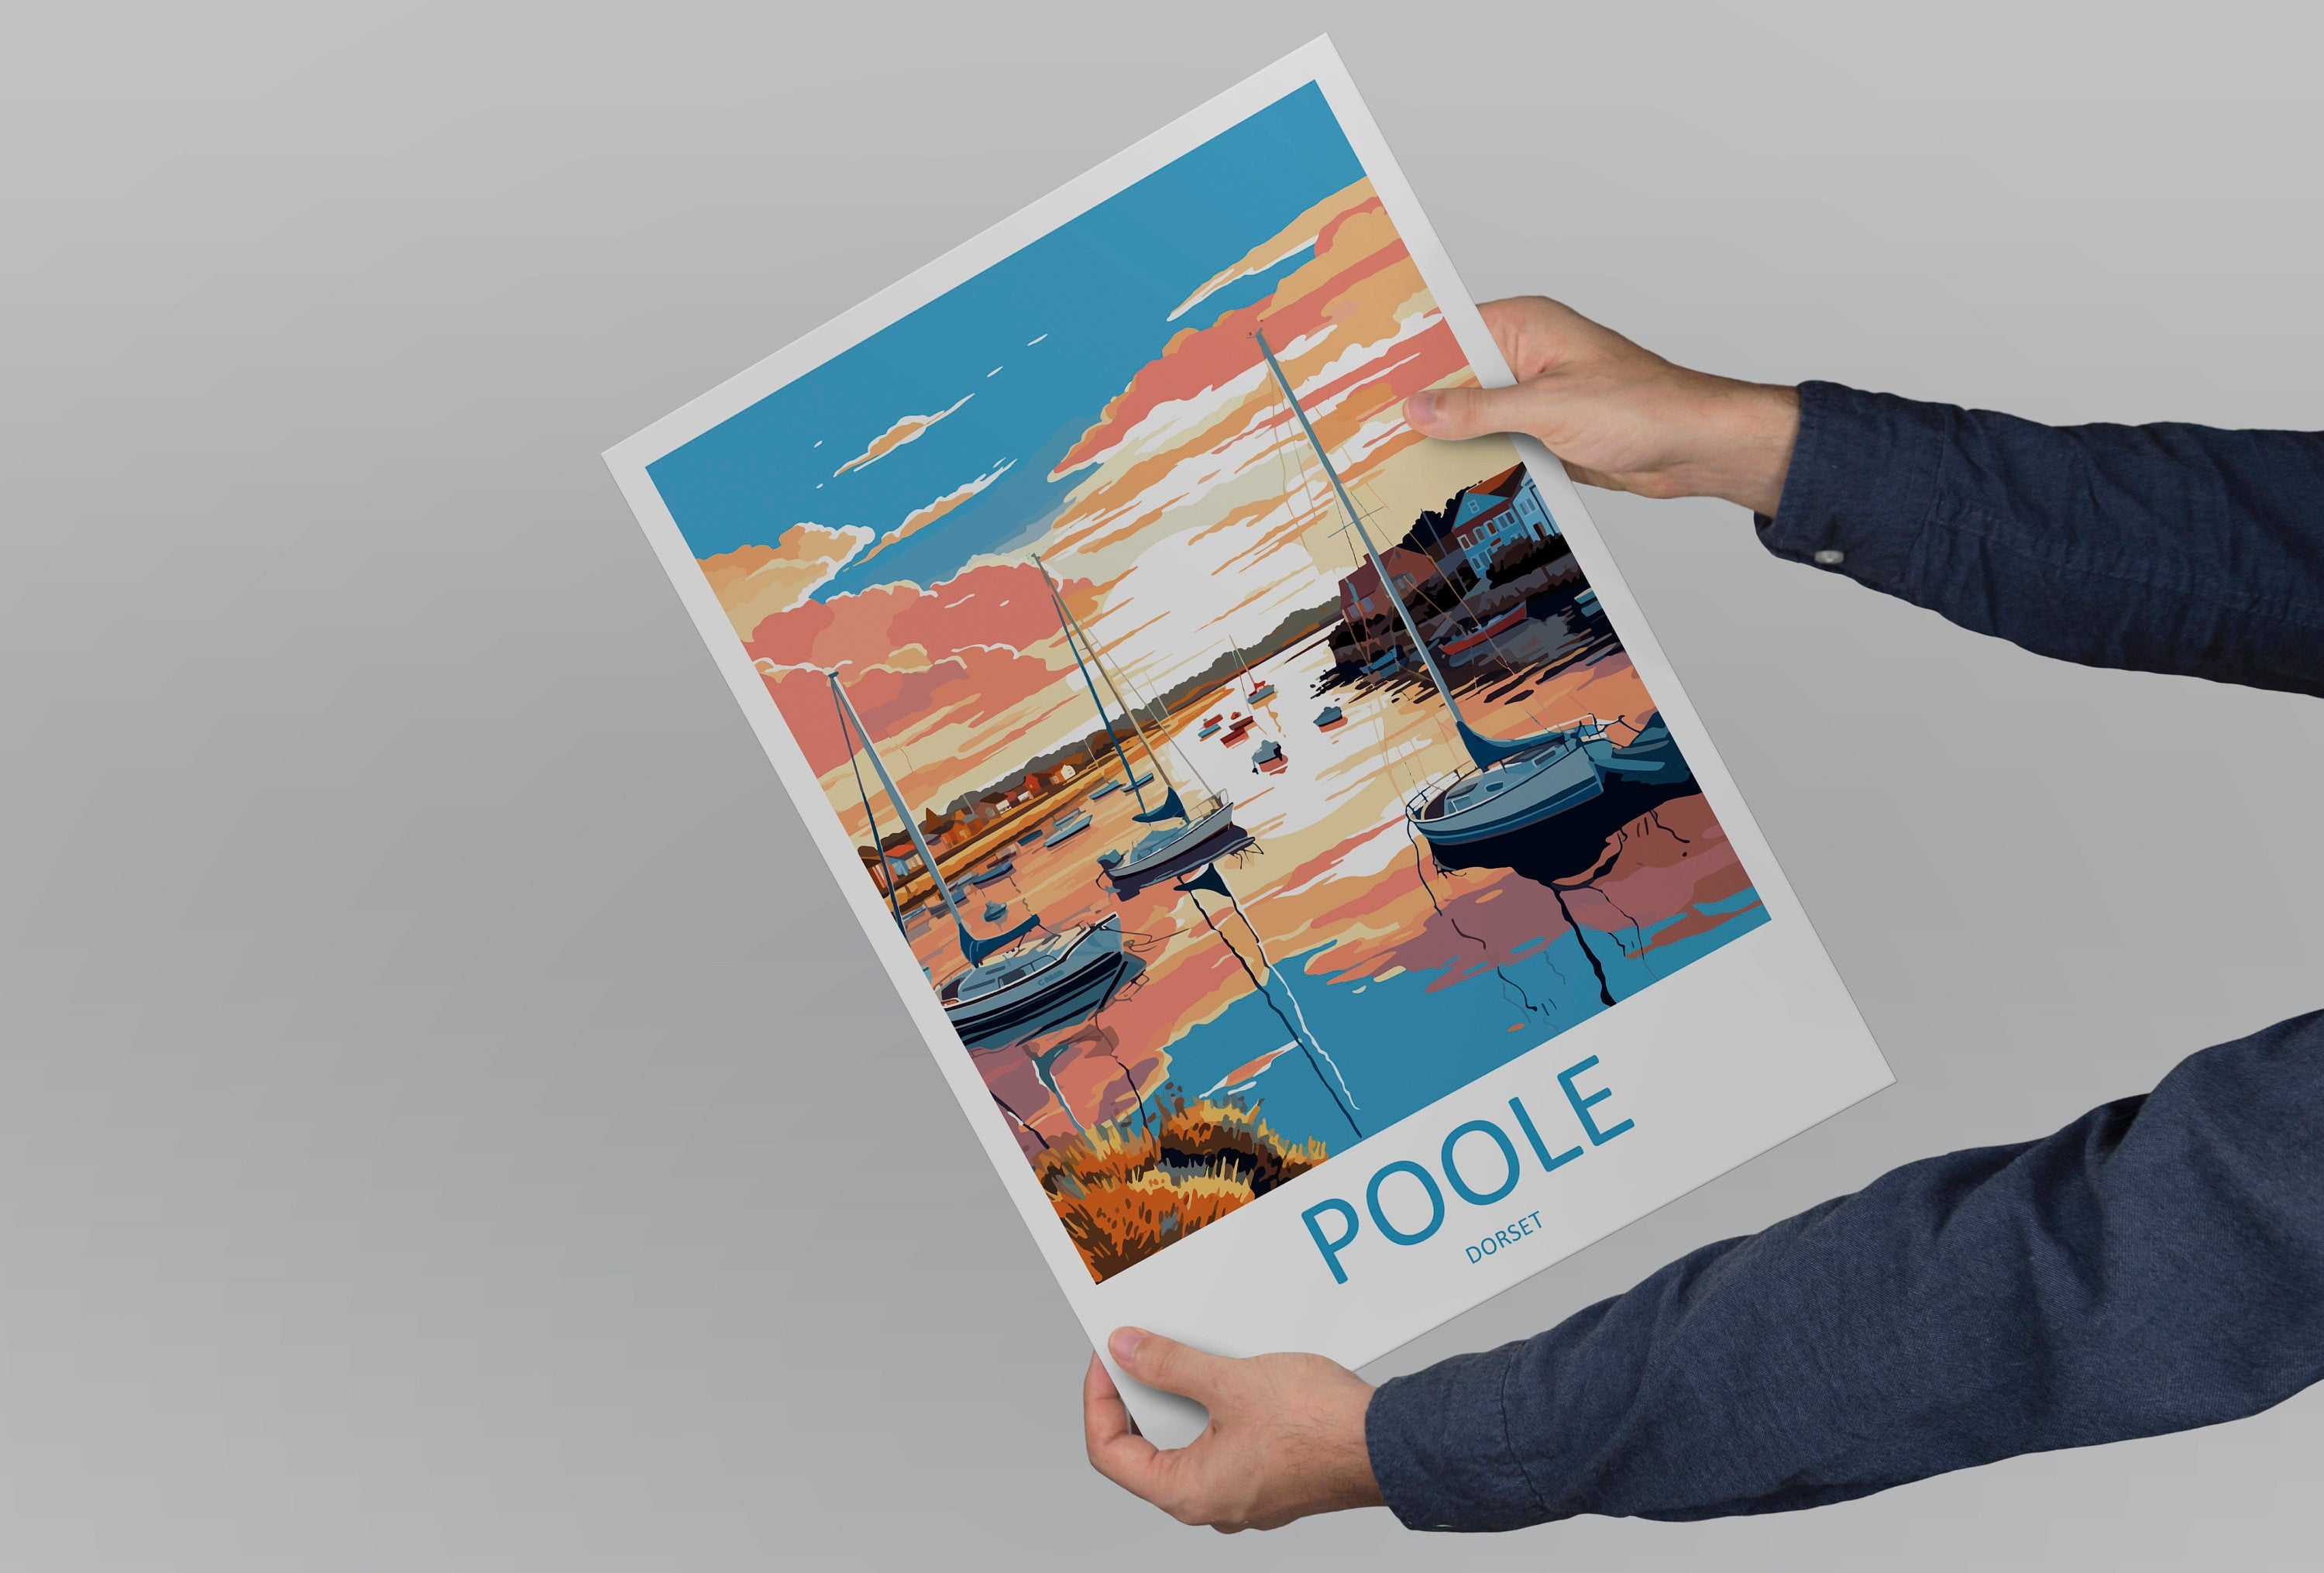 Poole Harbour Travel Print Wall Art Poole Wall Hanging Home Décor Poole Gift Art Lovers England Art Lover Gift Poole Travel Décor Poole